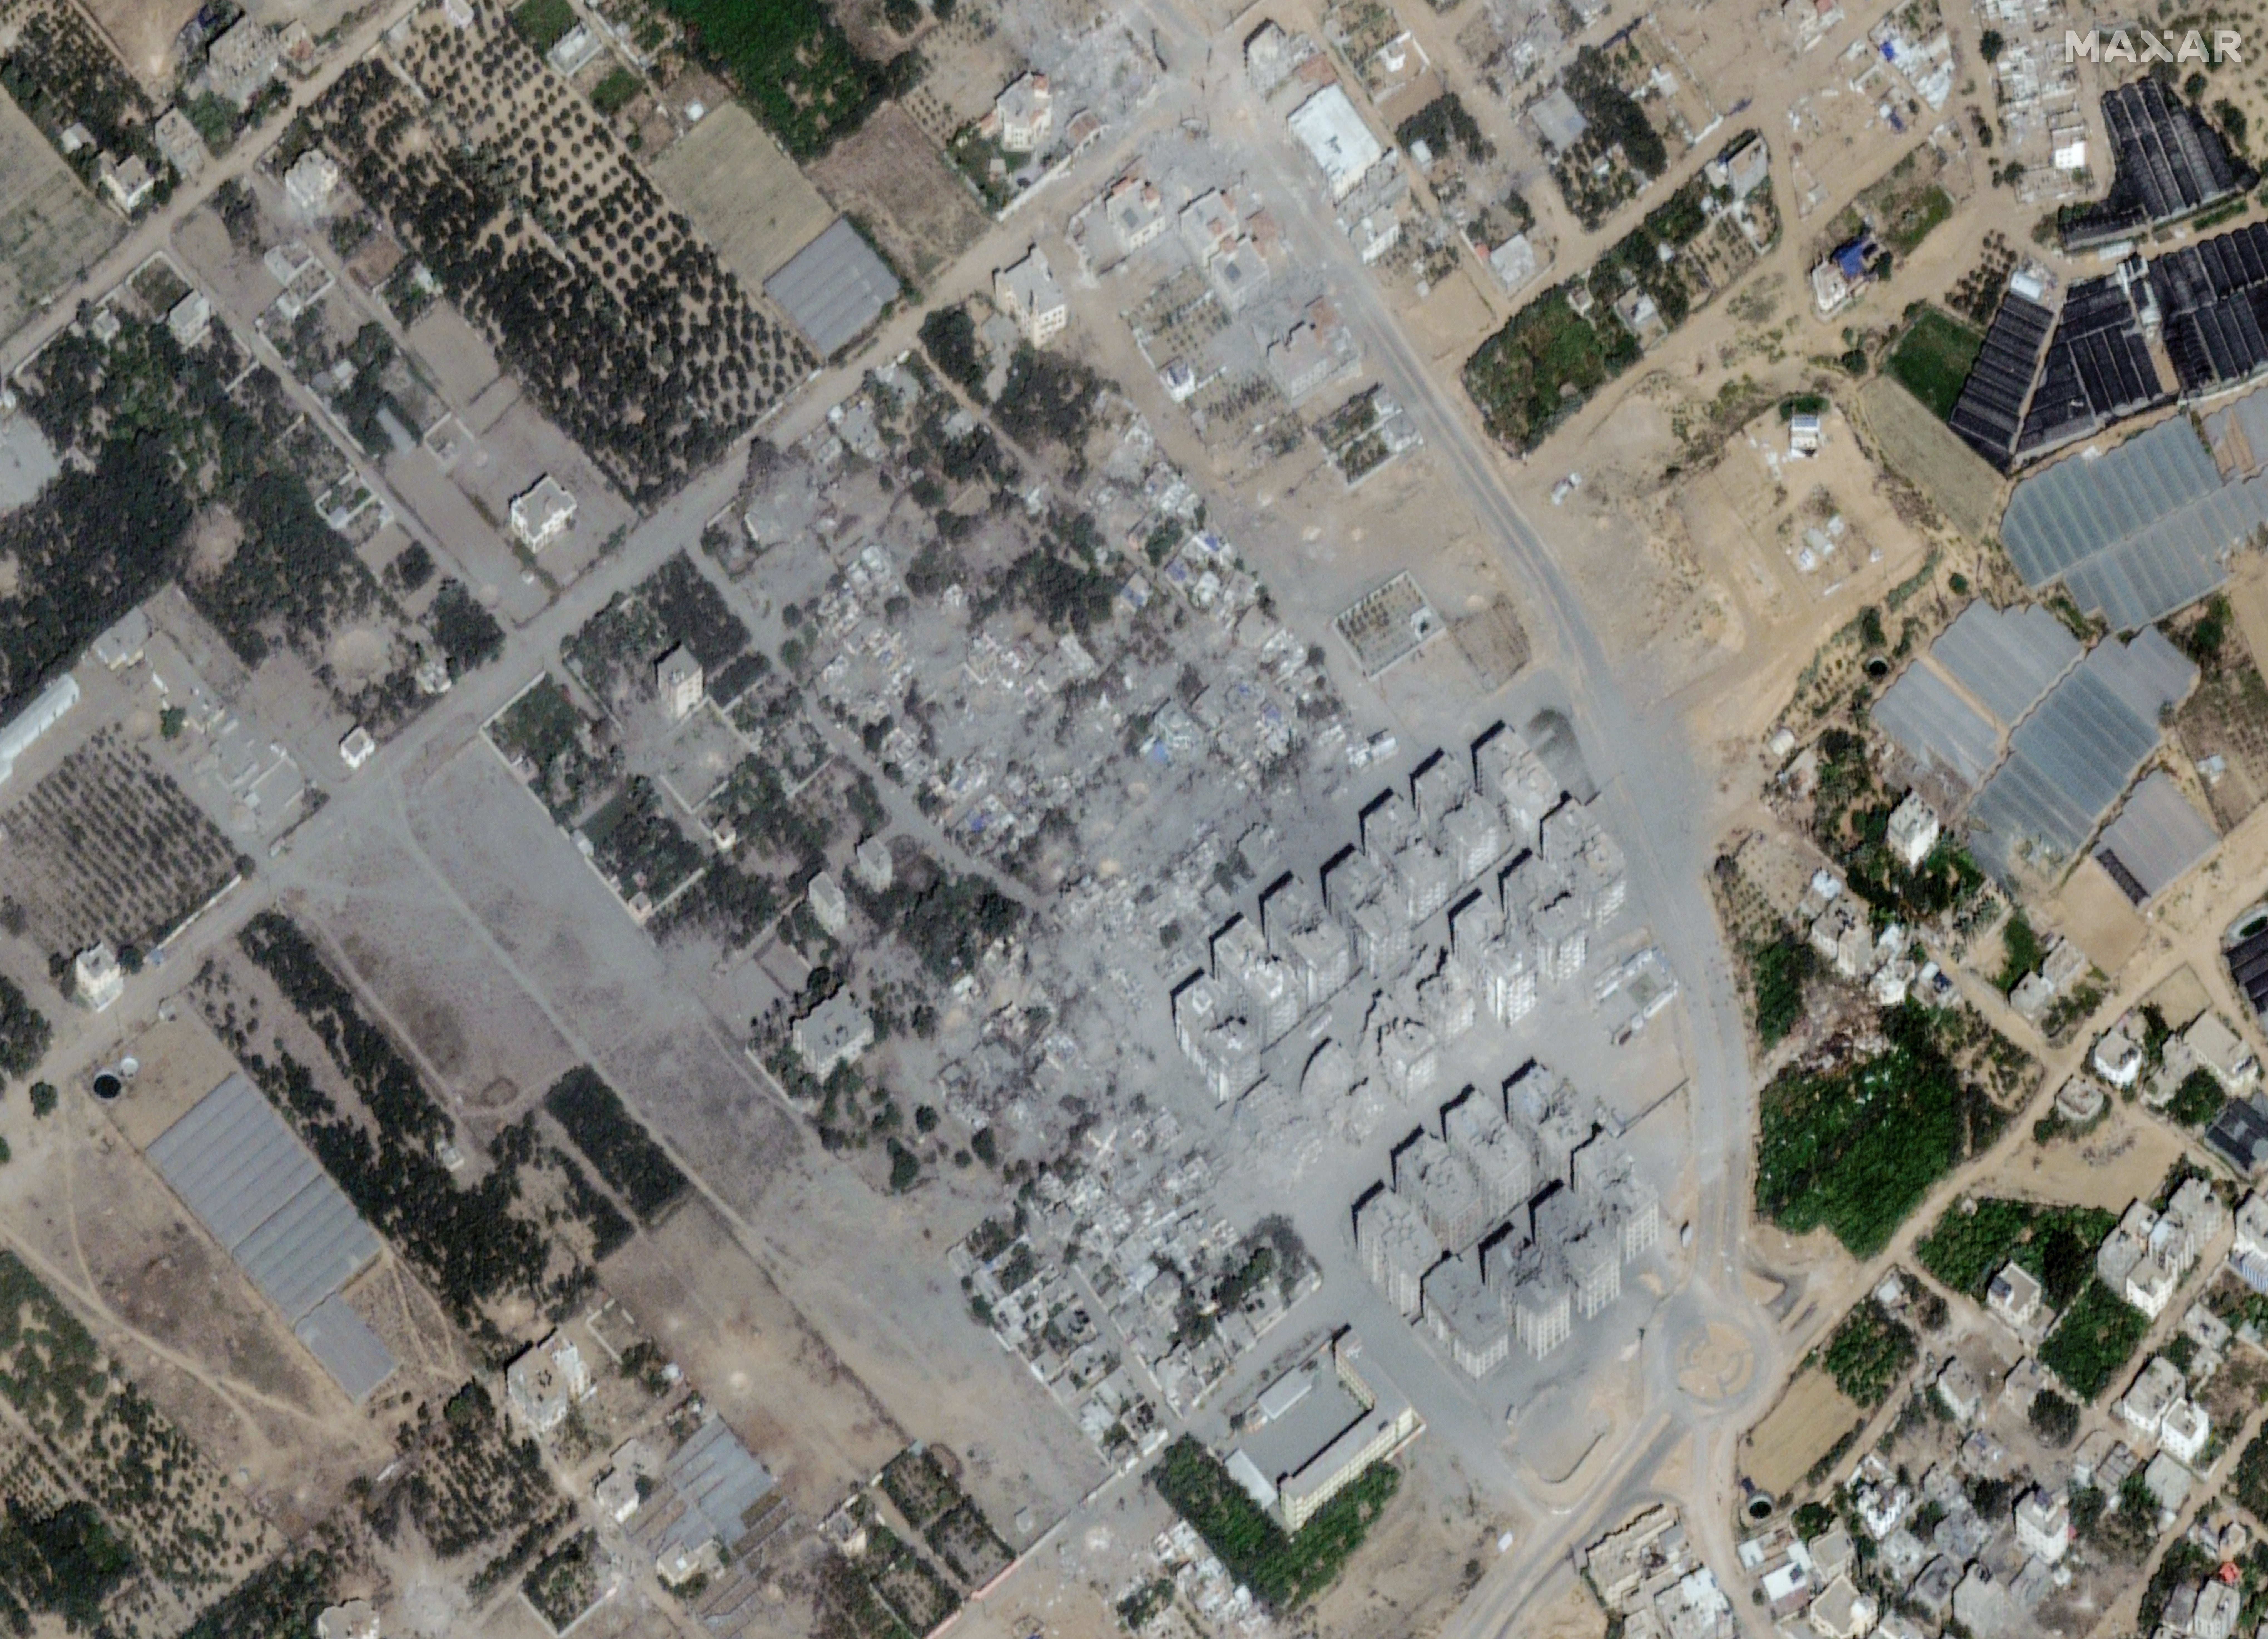 Satellite view shows damaged areas in Atatra in the northern Gaza Strip on 21 October